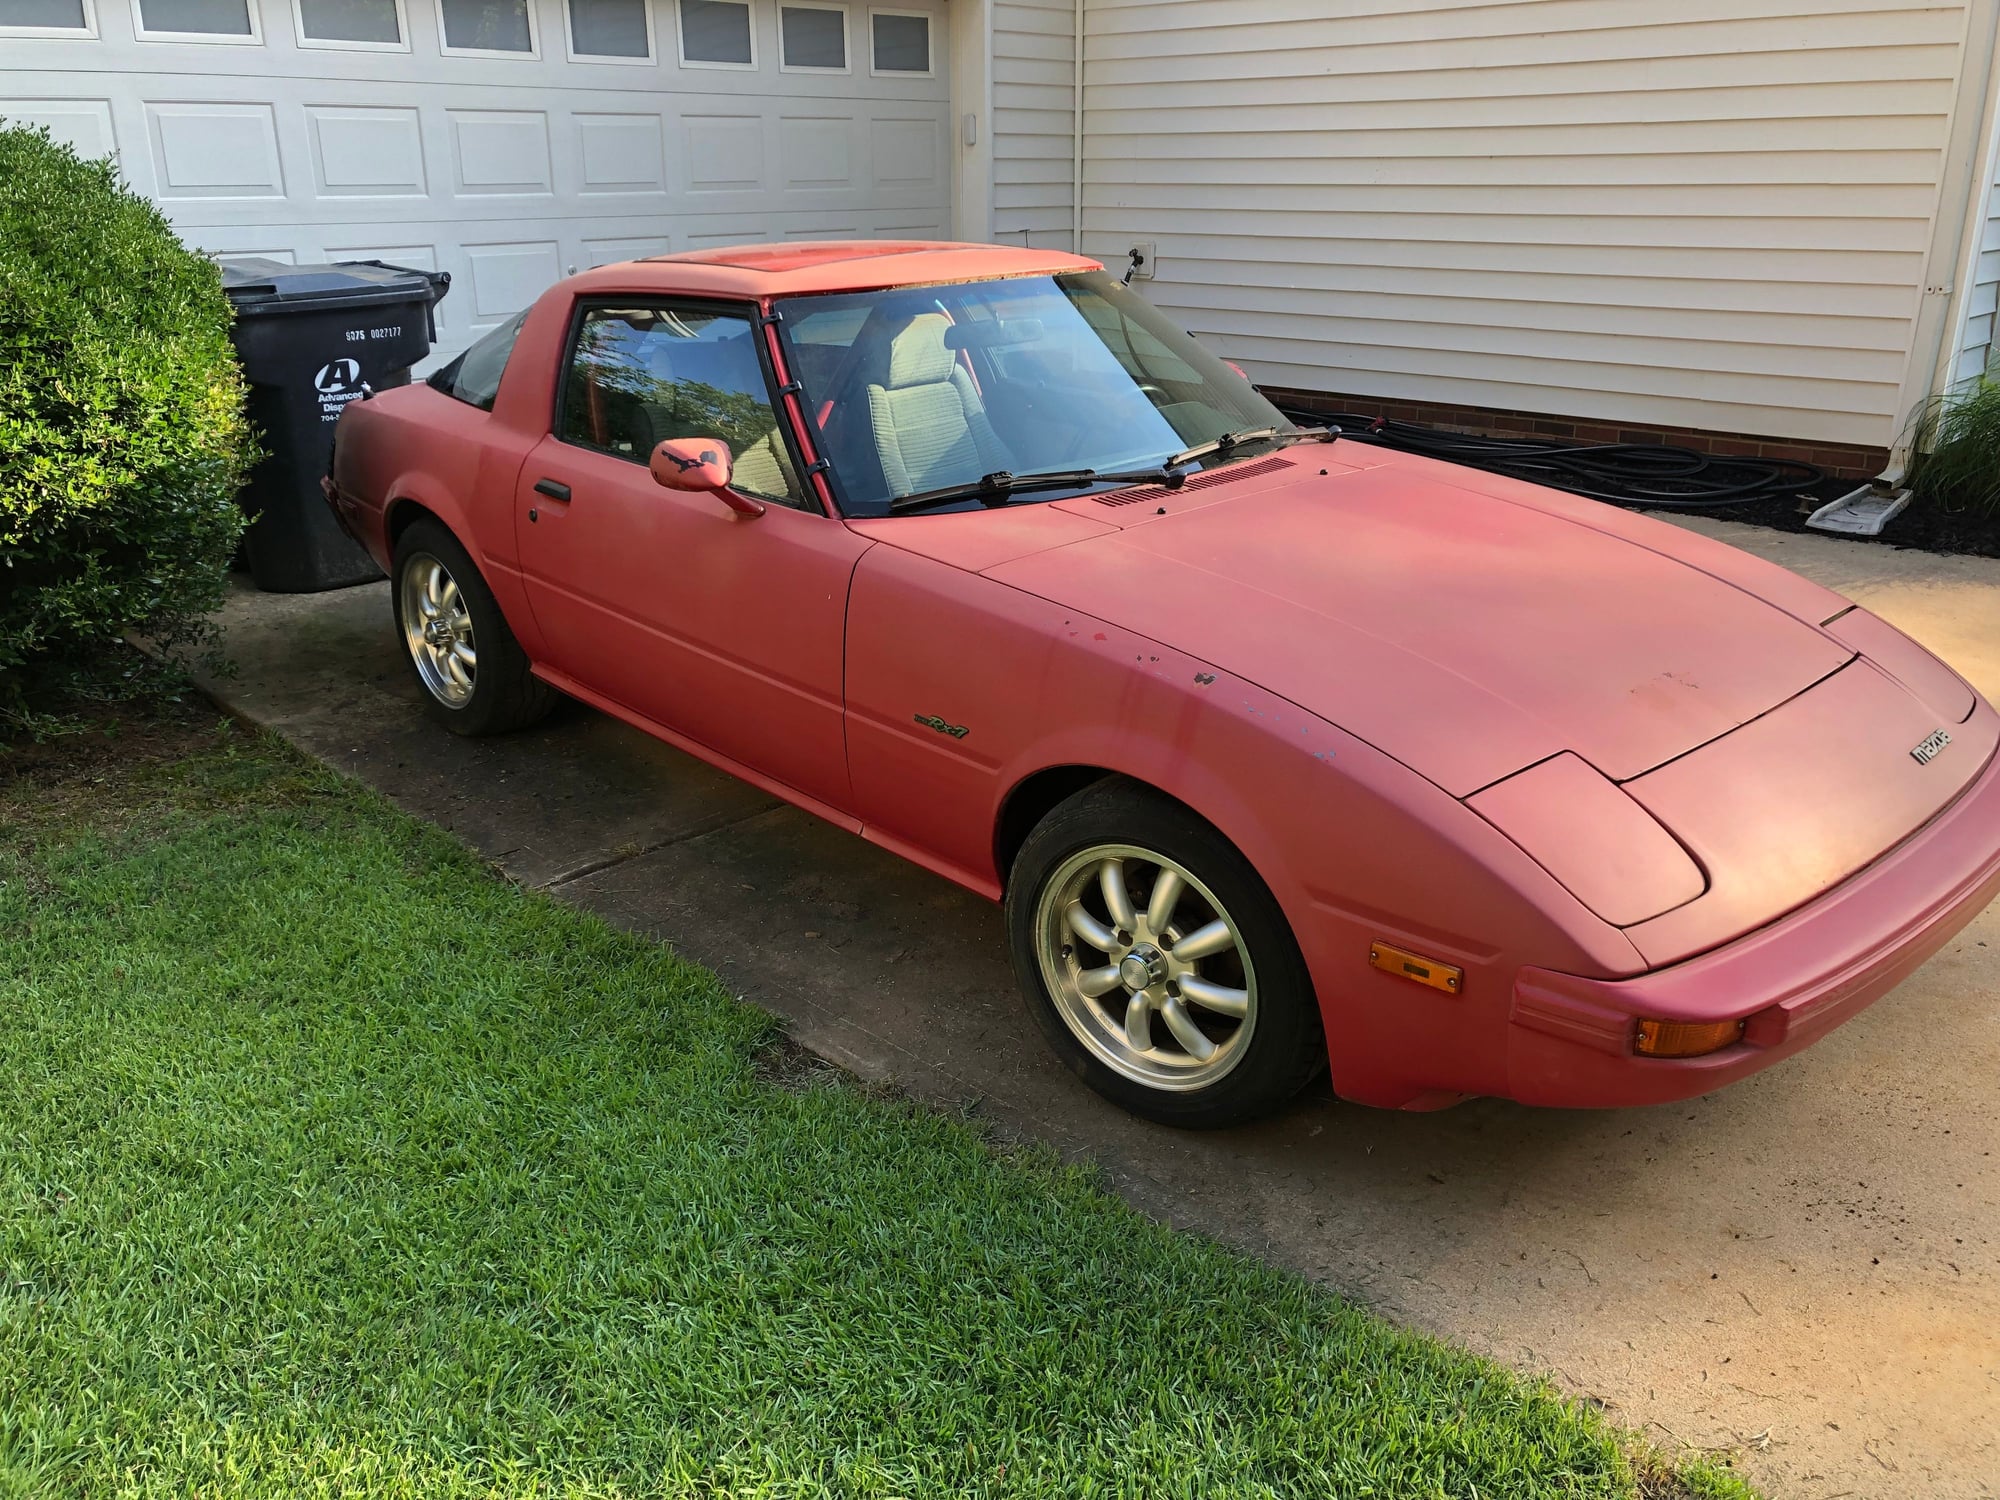 1985 Mazda RX-7 - One-owner 1985 RX-7 GSL for sale - 98,219 miles - $1,250 asking price - Used - VIN JM1FB3319F0879470 - Other - 2WD - Manual - Hatchback - Red - Huntersville, NC 28078, United States